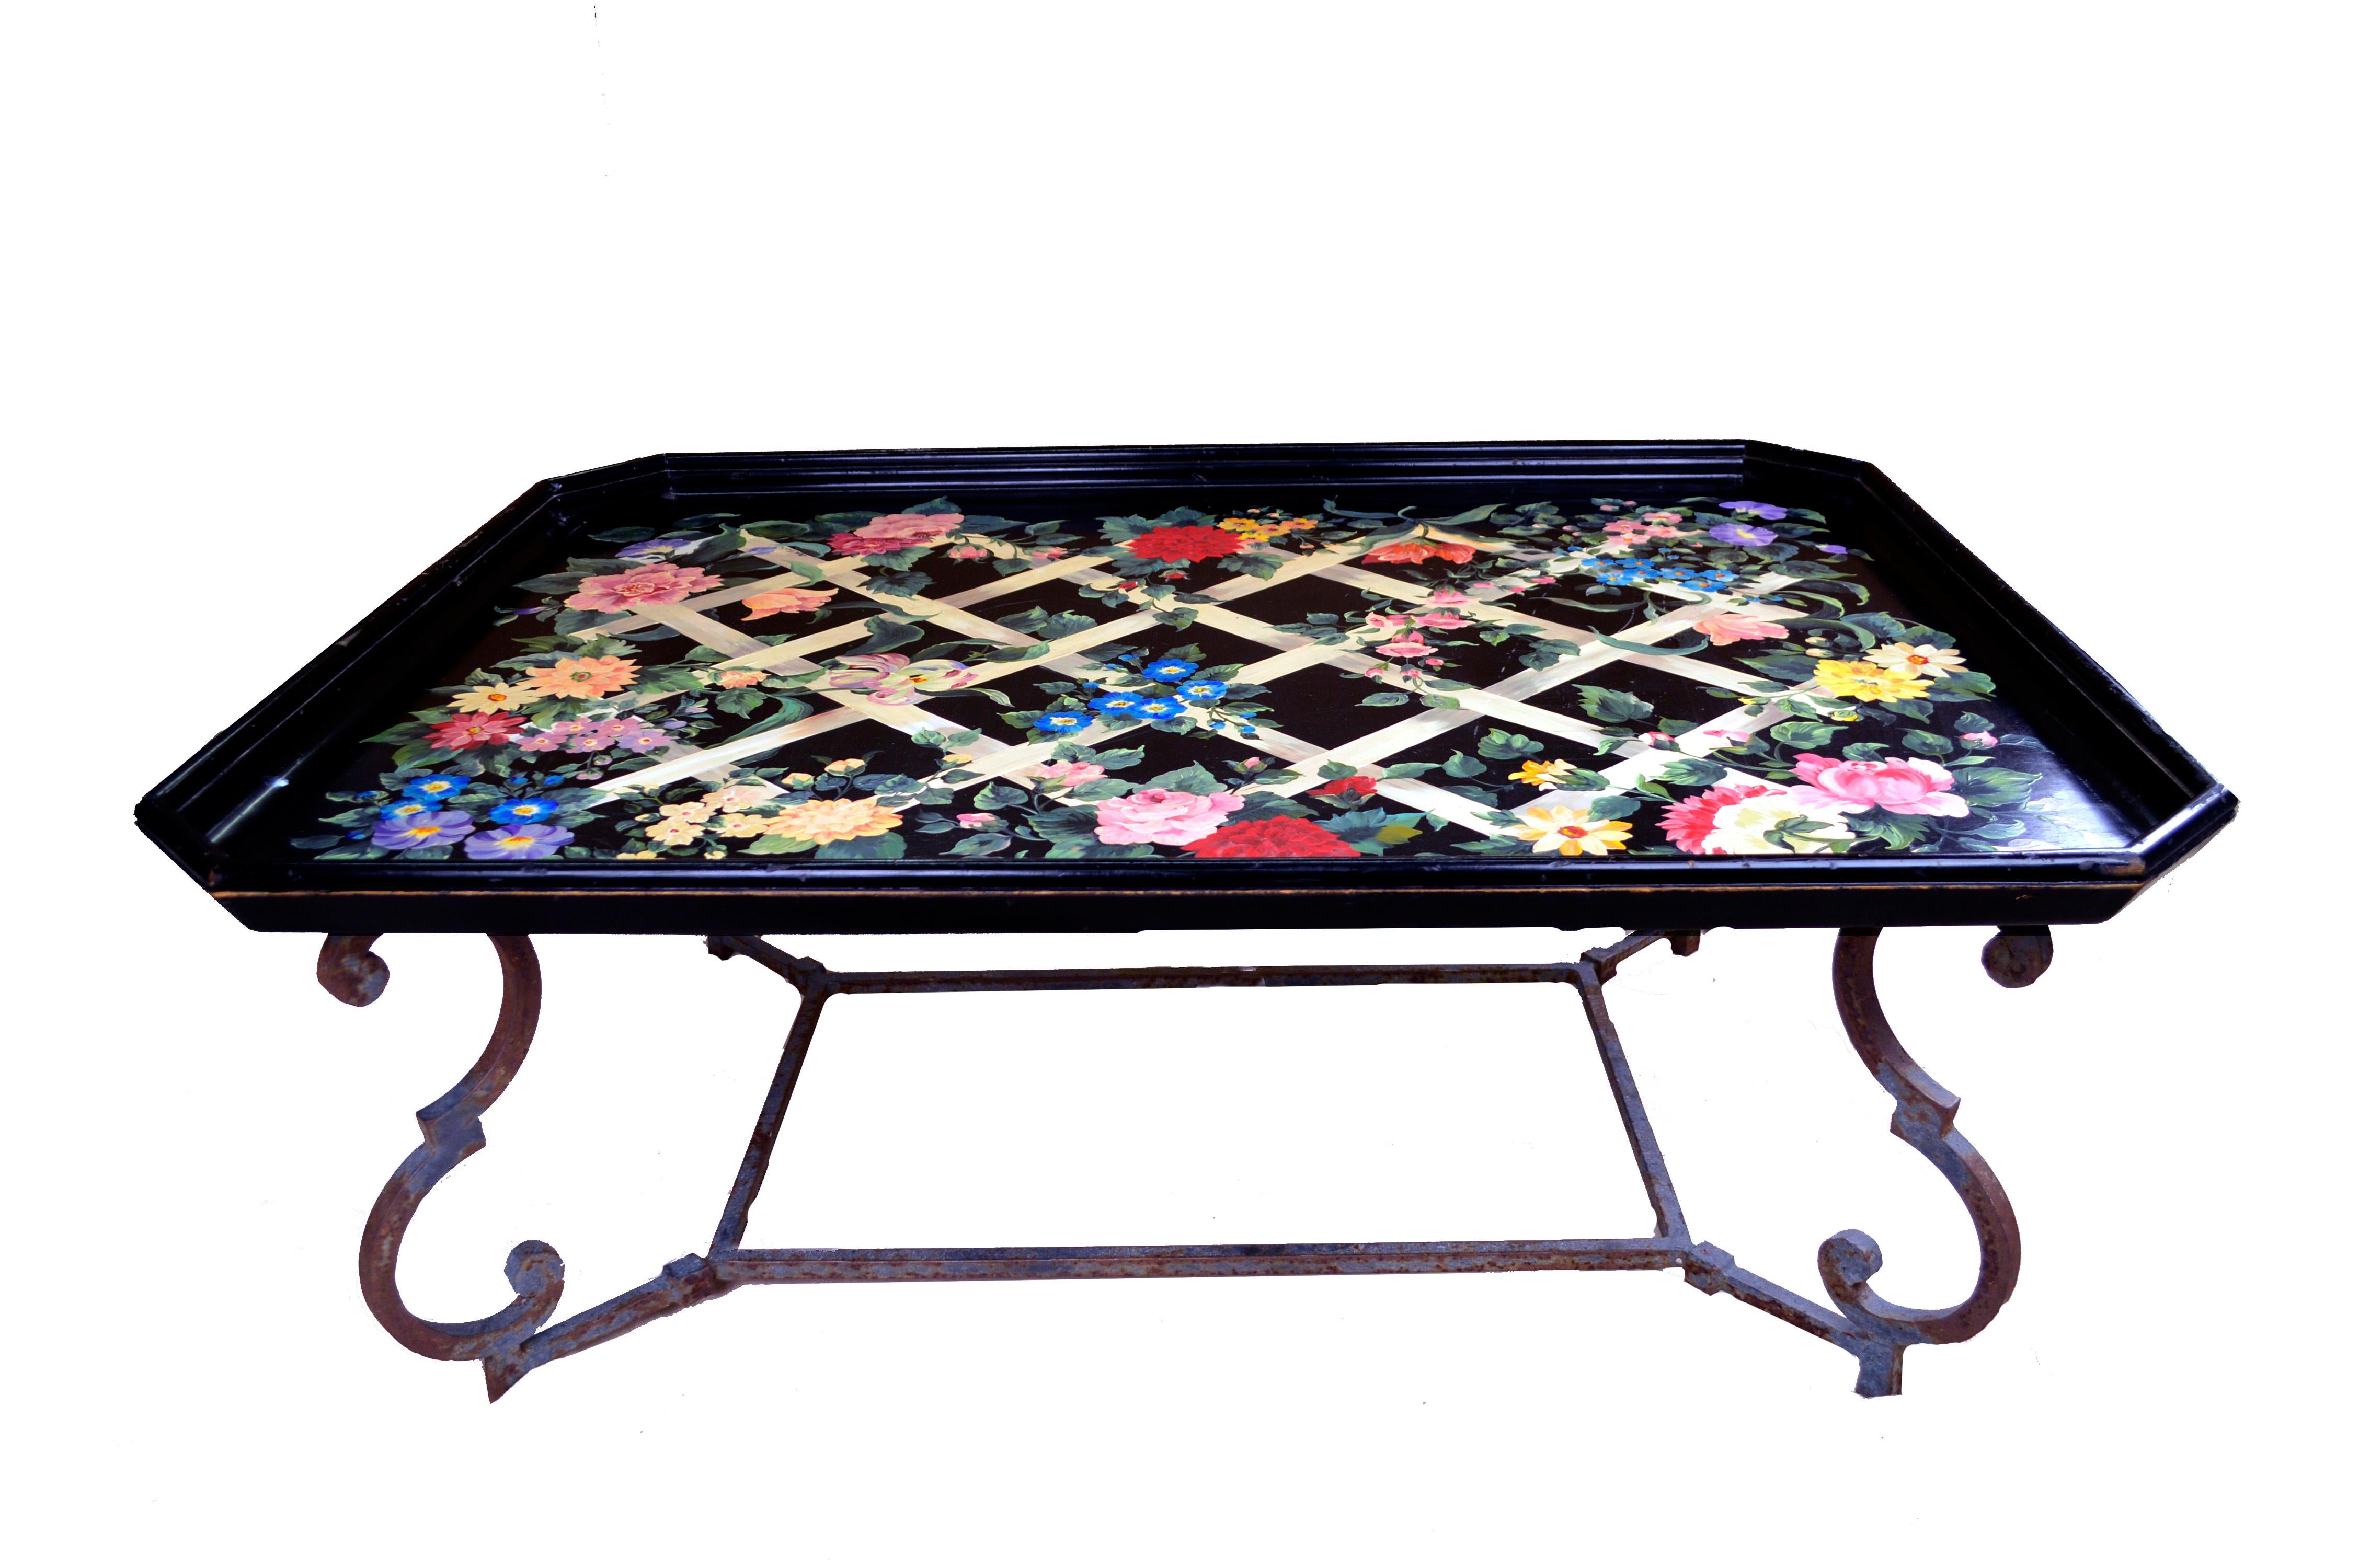 A wonderful oversized Italian Tray, Tole painted in a lattice and floral design by San Pedro artist Sharon (Shari) Tipich.
 Shari Tipich a self-taught artist began Trompe-l'œil  and Faux Finish wall painting and mural art in the 1980s and also